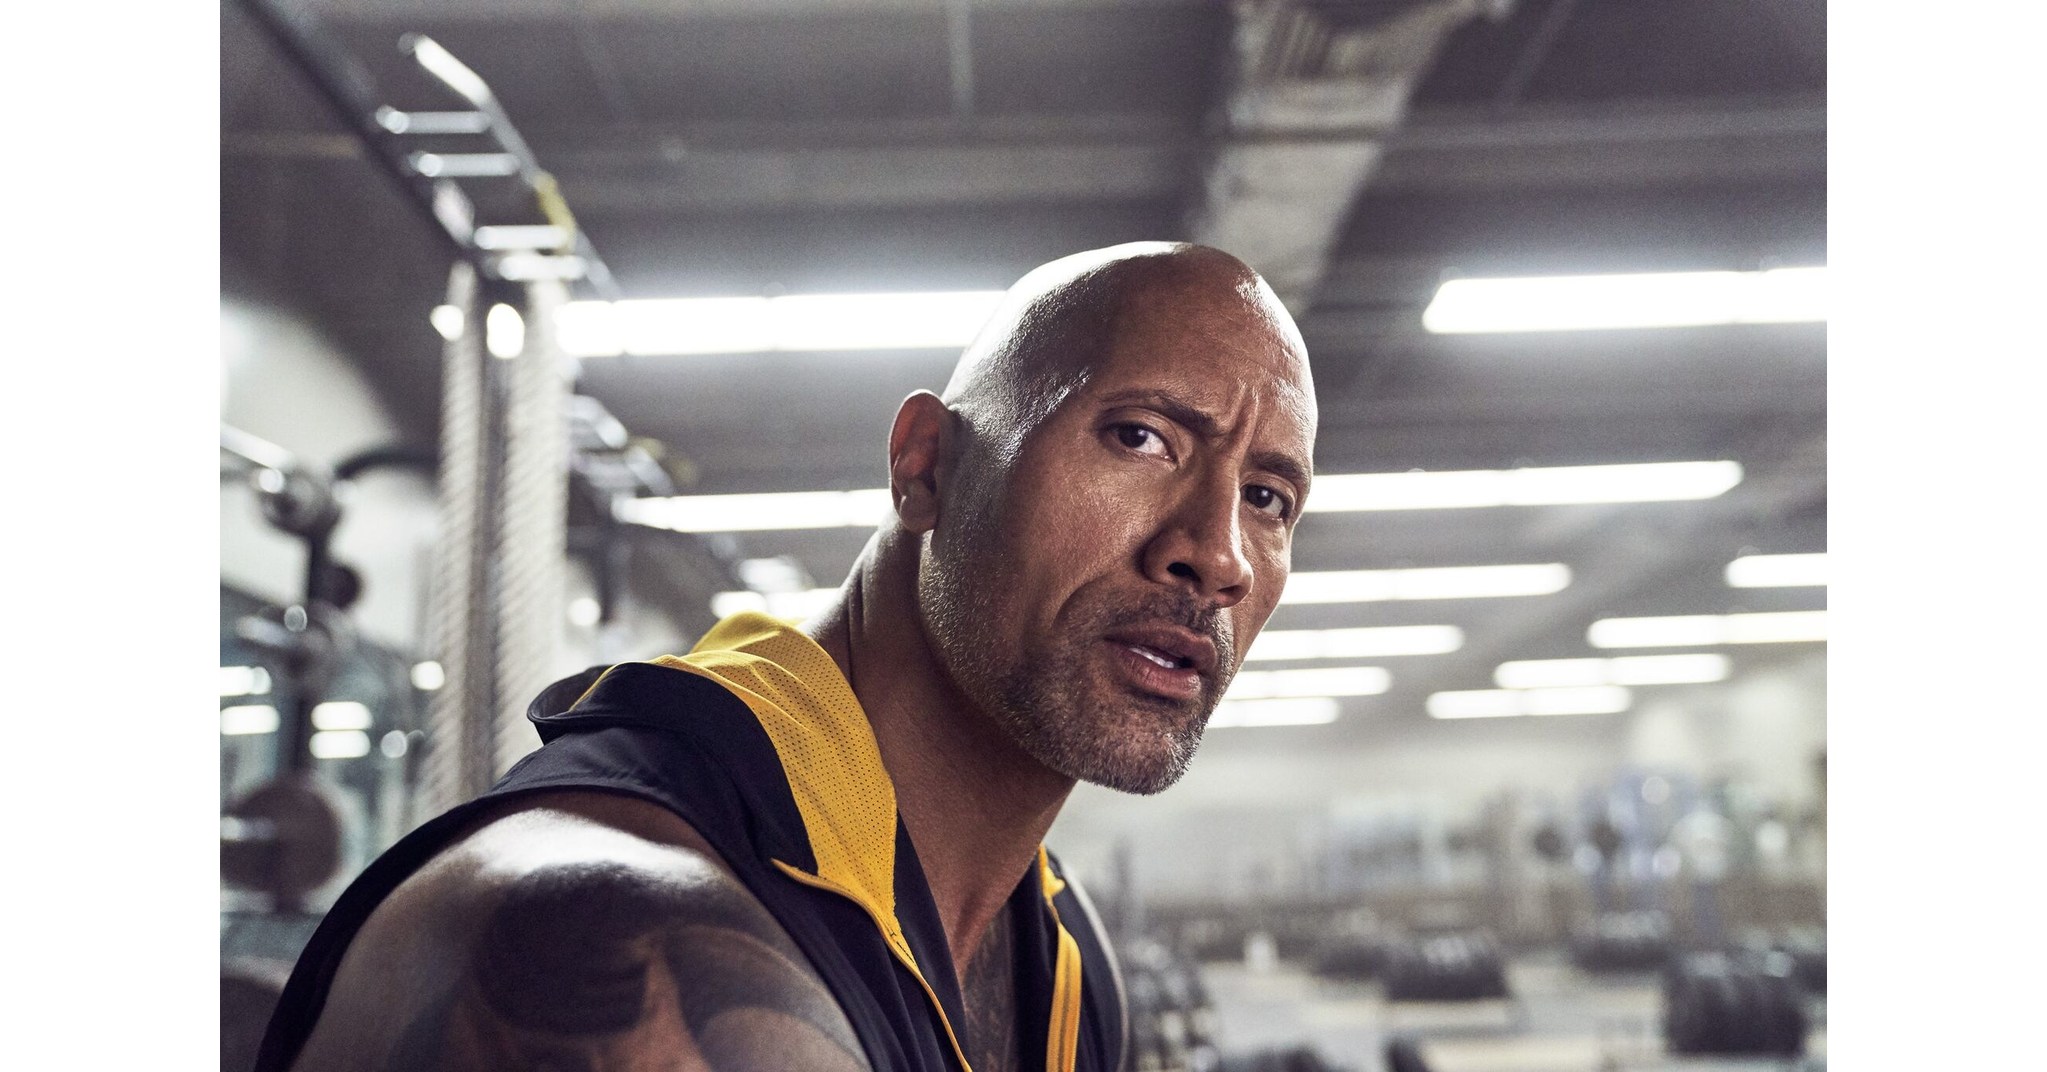 Under Armour Dwayne Johnson You To "How Are Going To Get Here?" In New Global Training Campaign